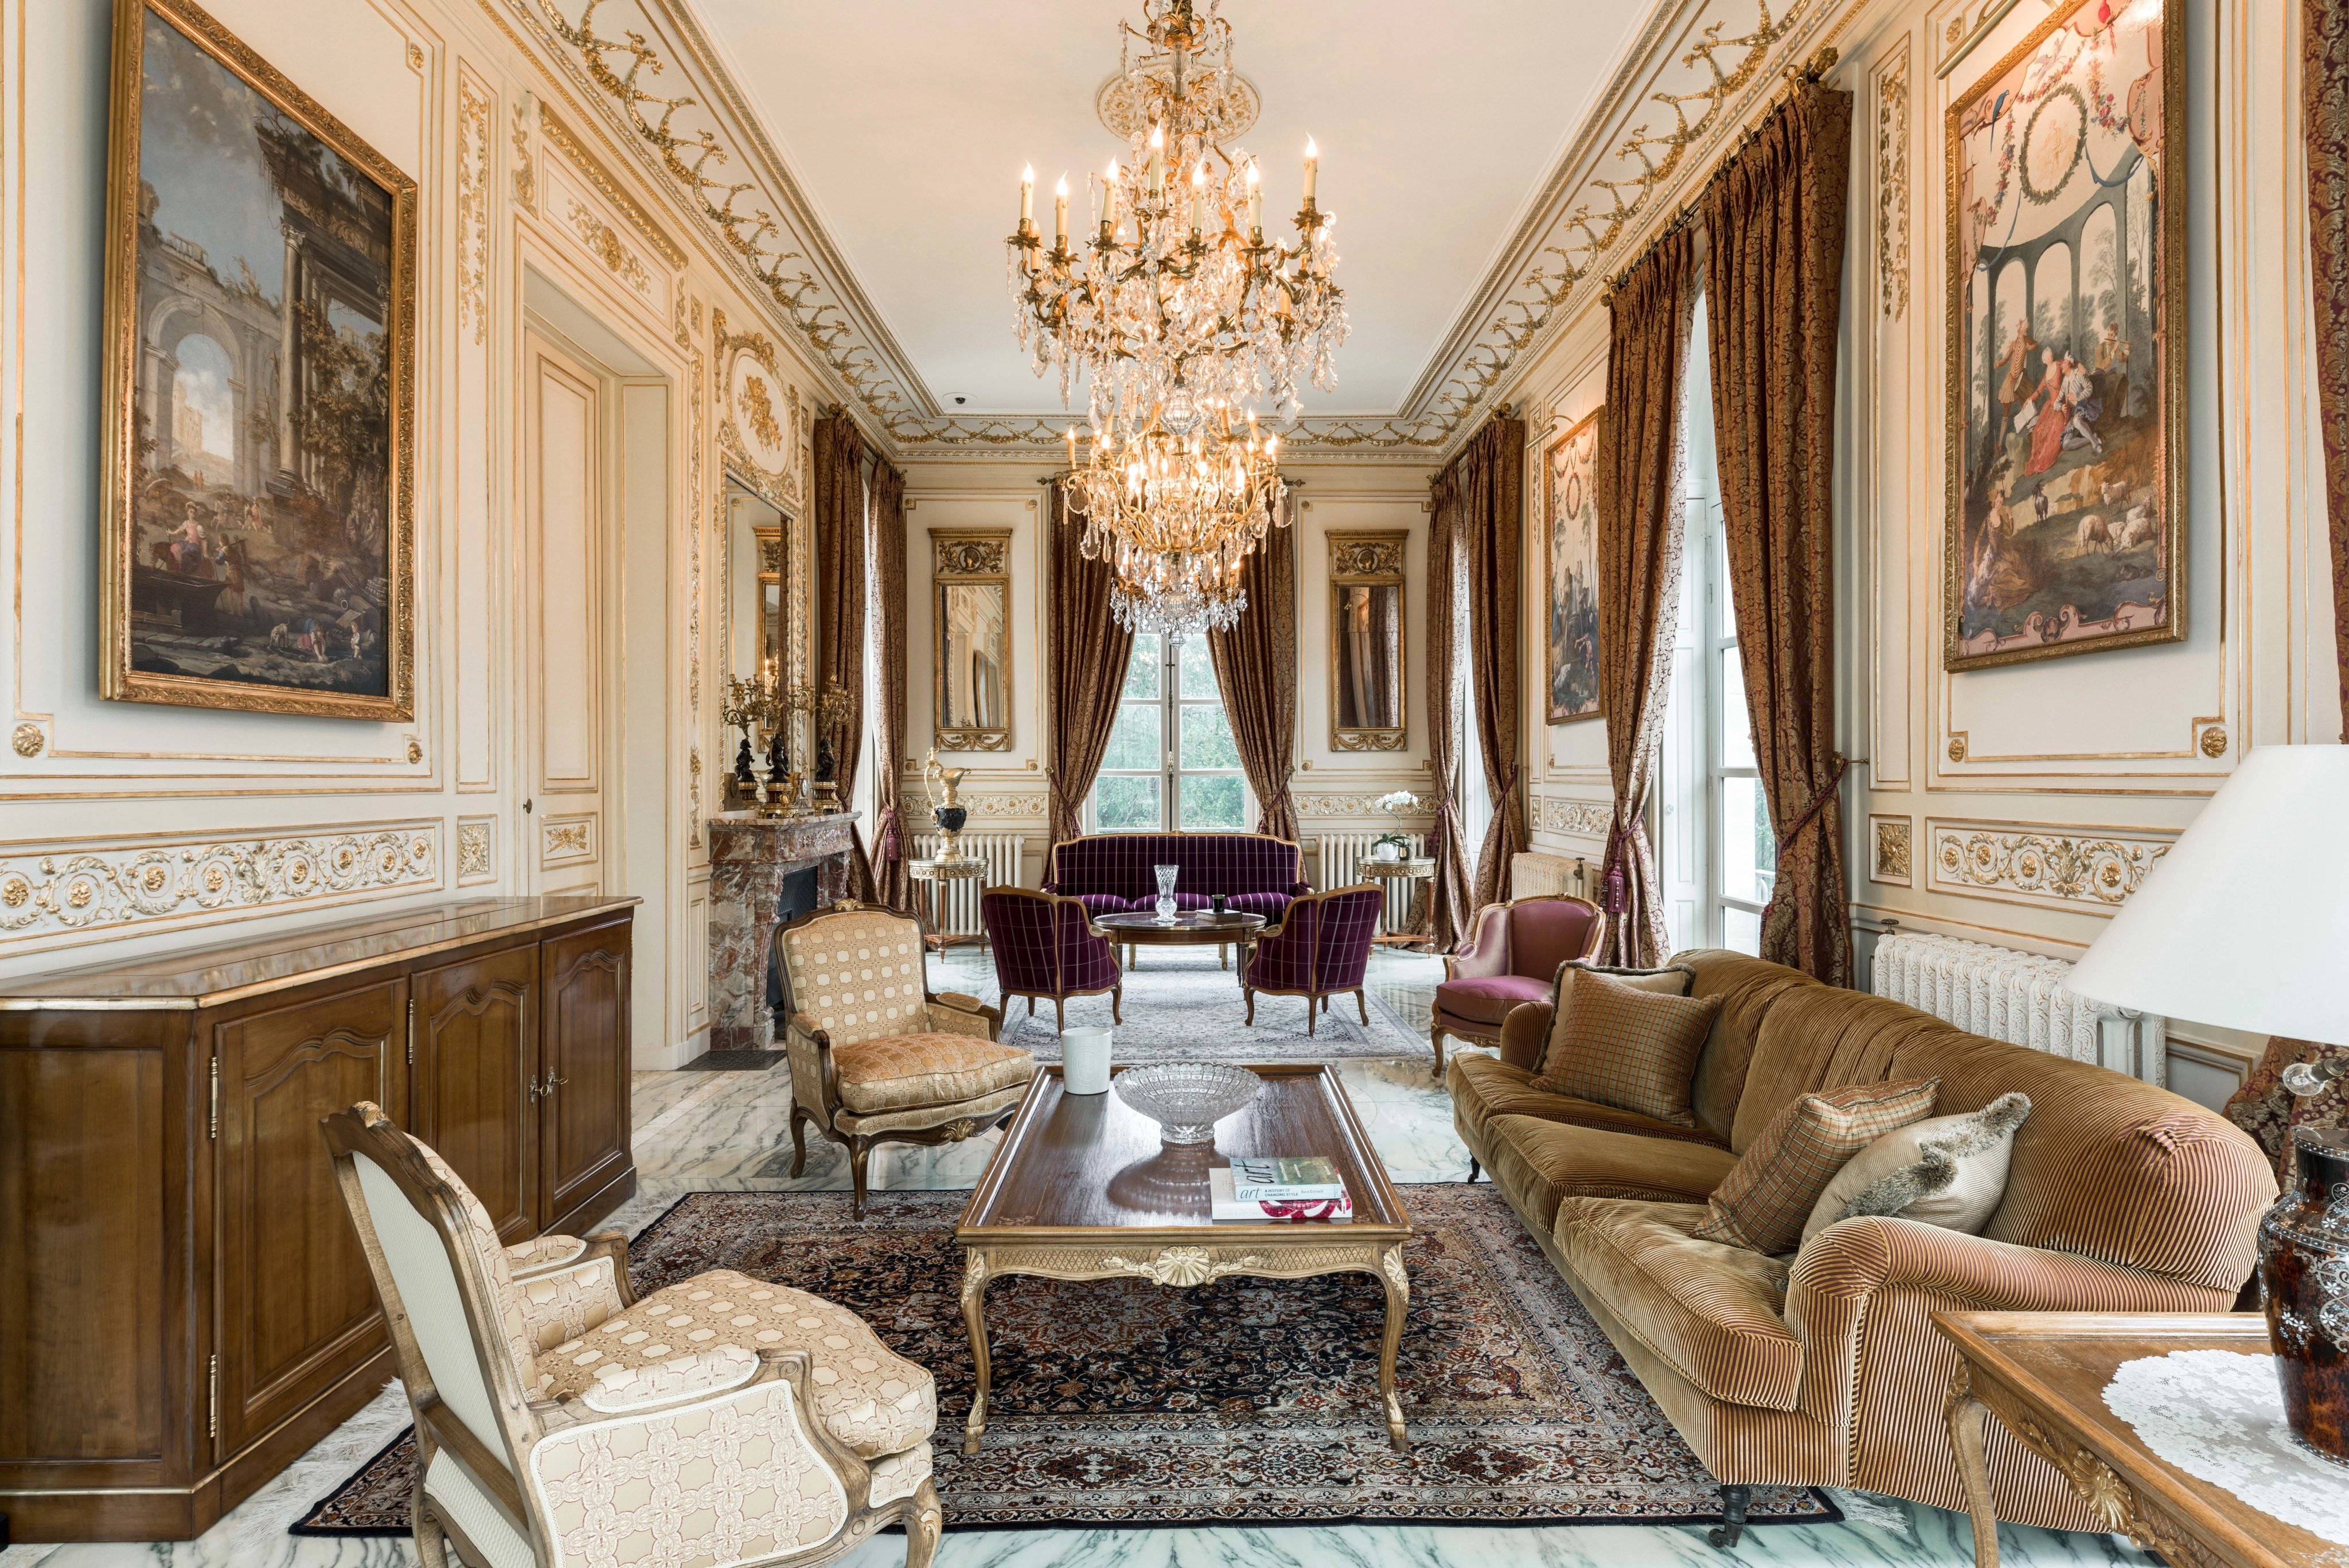 A sublime Palais inspired by Grand Trianon Palace, 20 min from Paris_1735